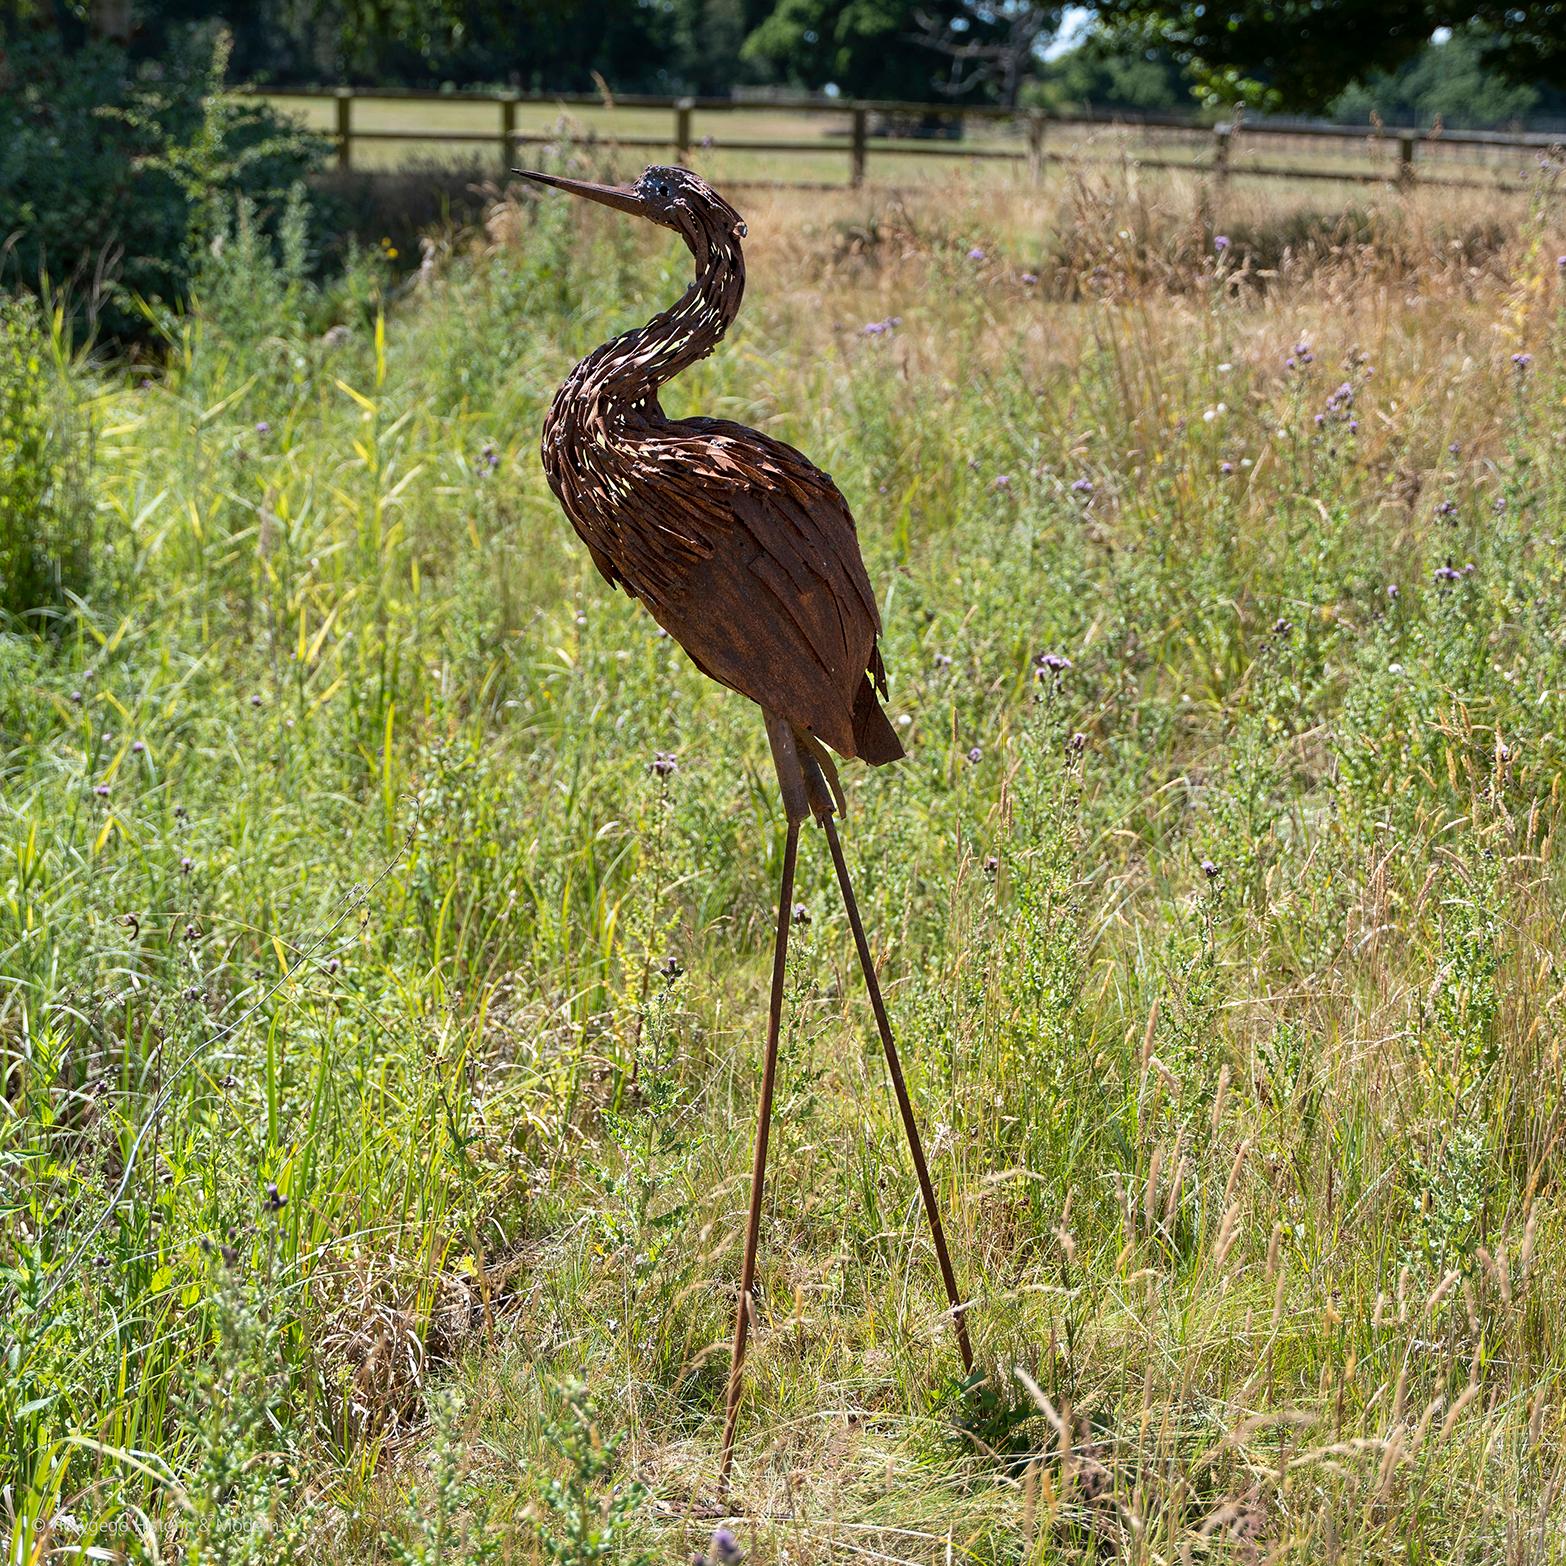 Realistic wrought iron life size, sculpture of a wading crane or large heron
Stylish feature in the garden, pond, river, lake or home

Measures: height 155cm., 61